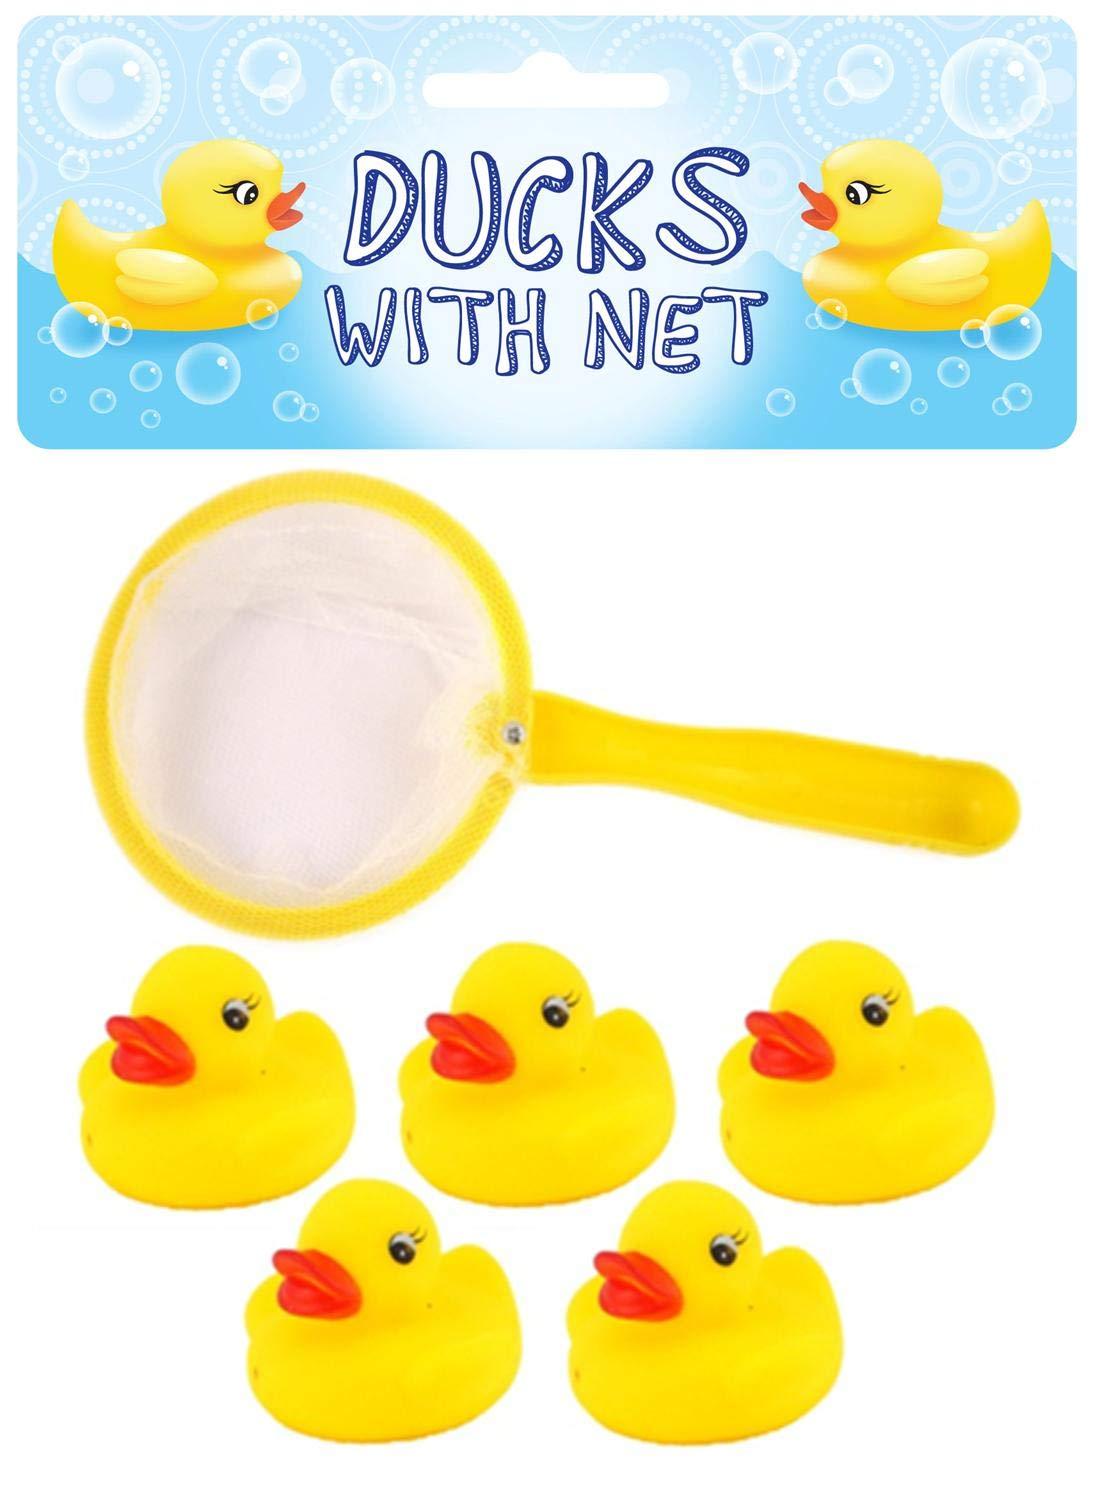 Henbrandt 5 Mini Rubber Ducks with Fishing Net Bath Toy Paddling Pool Game  Summer Water Fun Toys for Kids 1